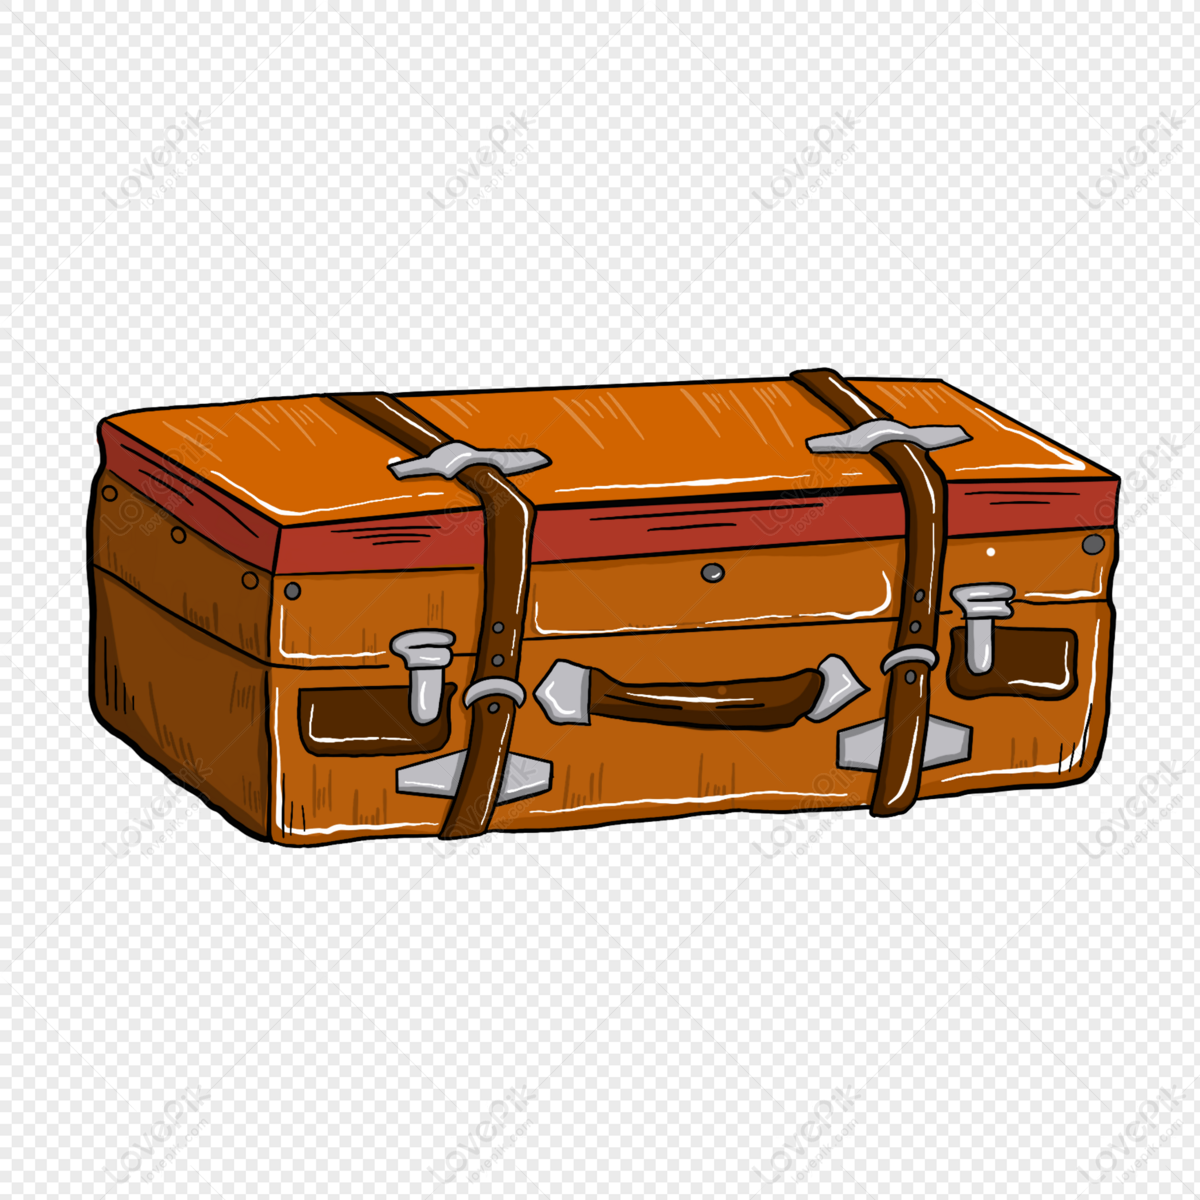 Cartoon Suitcase PNG Transparent Image And Clipart Image For Free Download  - Lovepik | 401460287